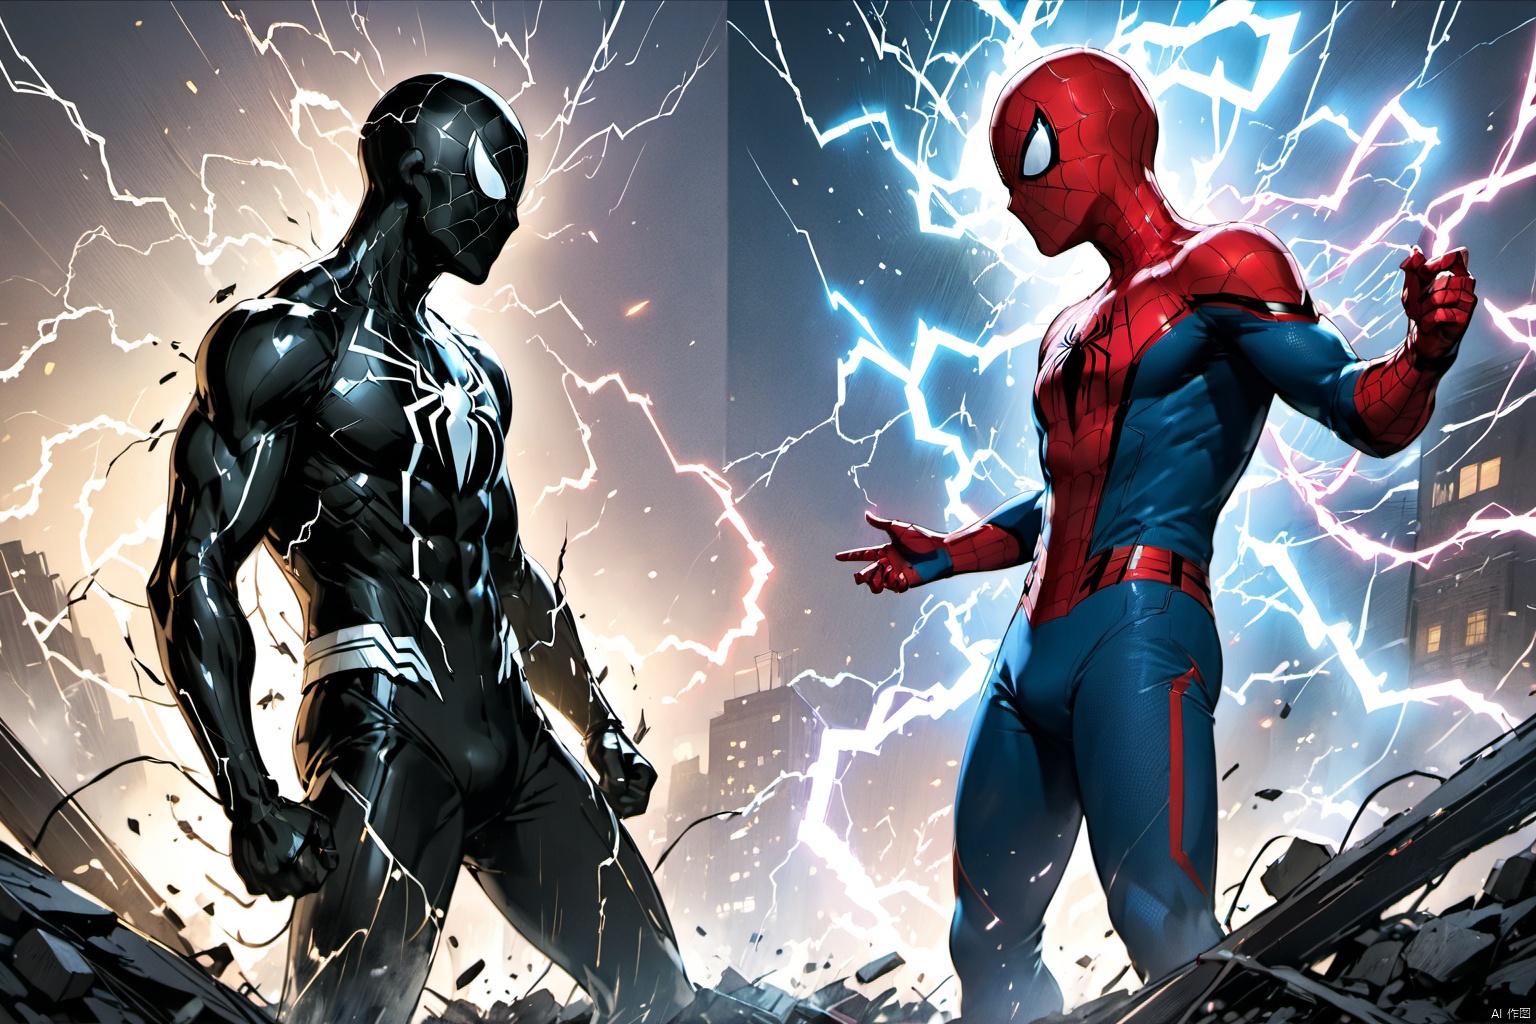  ultra-detailed,(best quality),((masterpiece)),(highres),original,extremely detailed 8K wallpaper,(an extremely delicate and beautiful),anime,

 An anime illustration featuring Electro, a humanoid figure composed entirely of lightning, facing off against Spider-Man. The two confront each other, standing face to face in a tense atmosphere with debris flying and electricity swirling around them. The composition is split in half, with Spider-Man displaying heroism and Electro exuding an evil presence, capturing emotional tension. The artwork is full of vitality and emotion, truly captivating to the viewer.